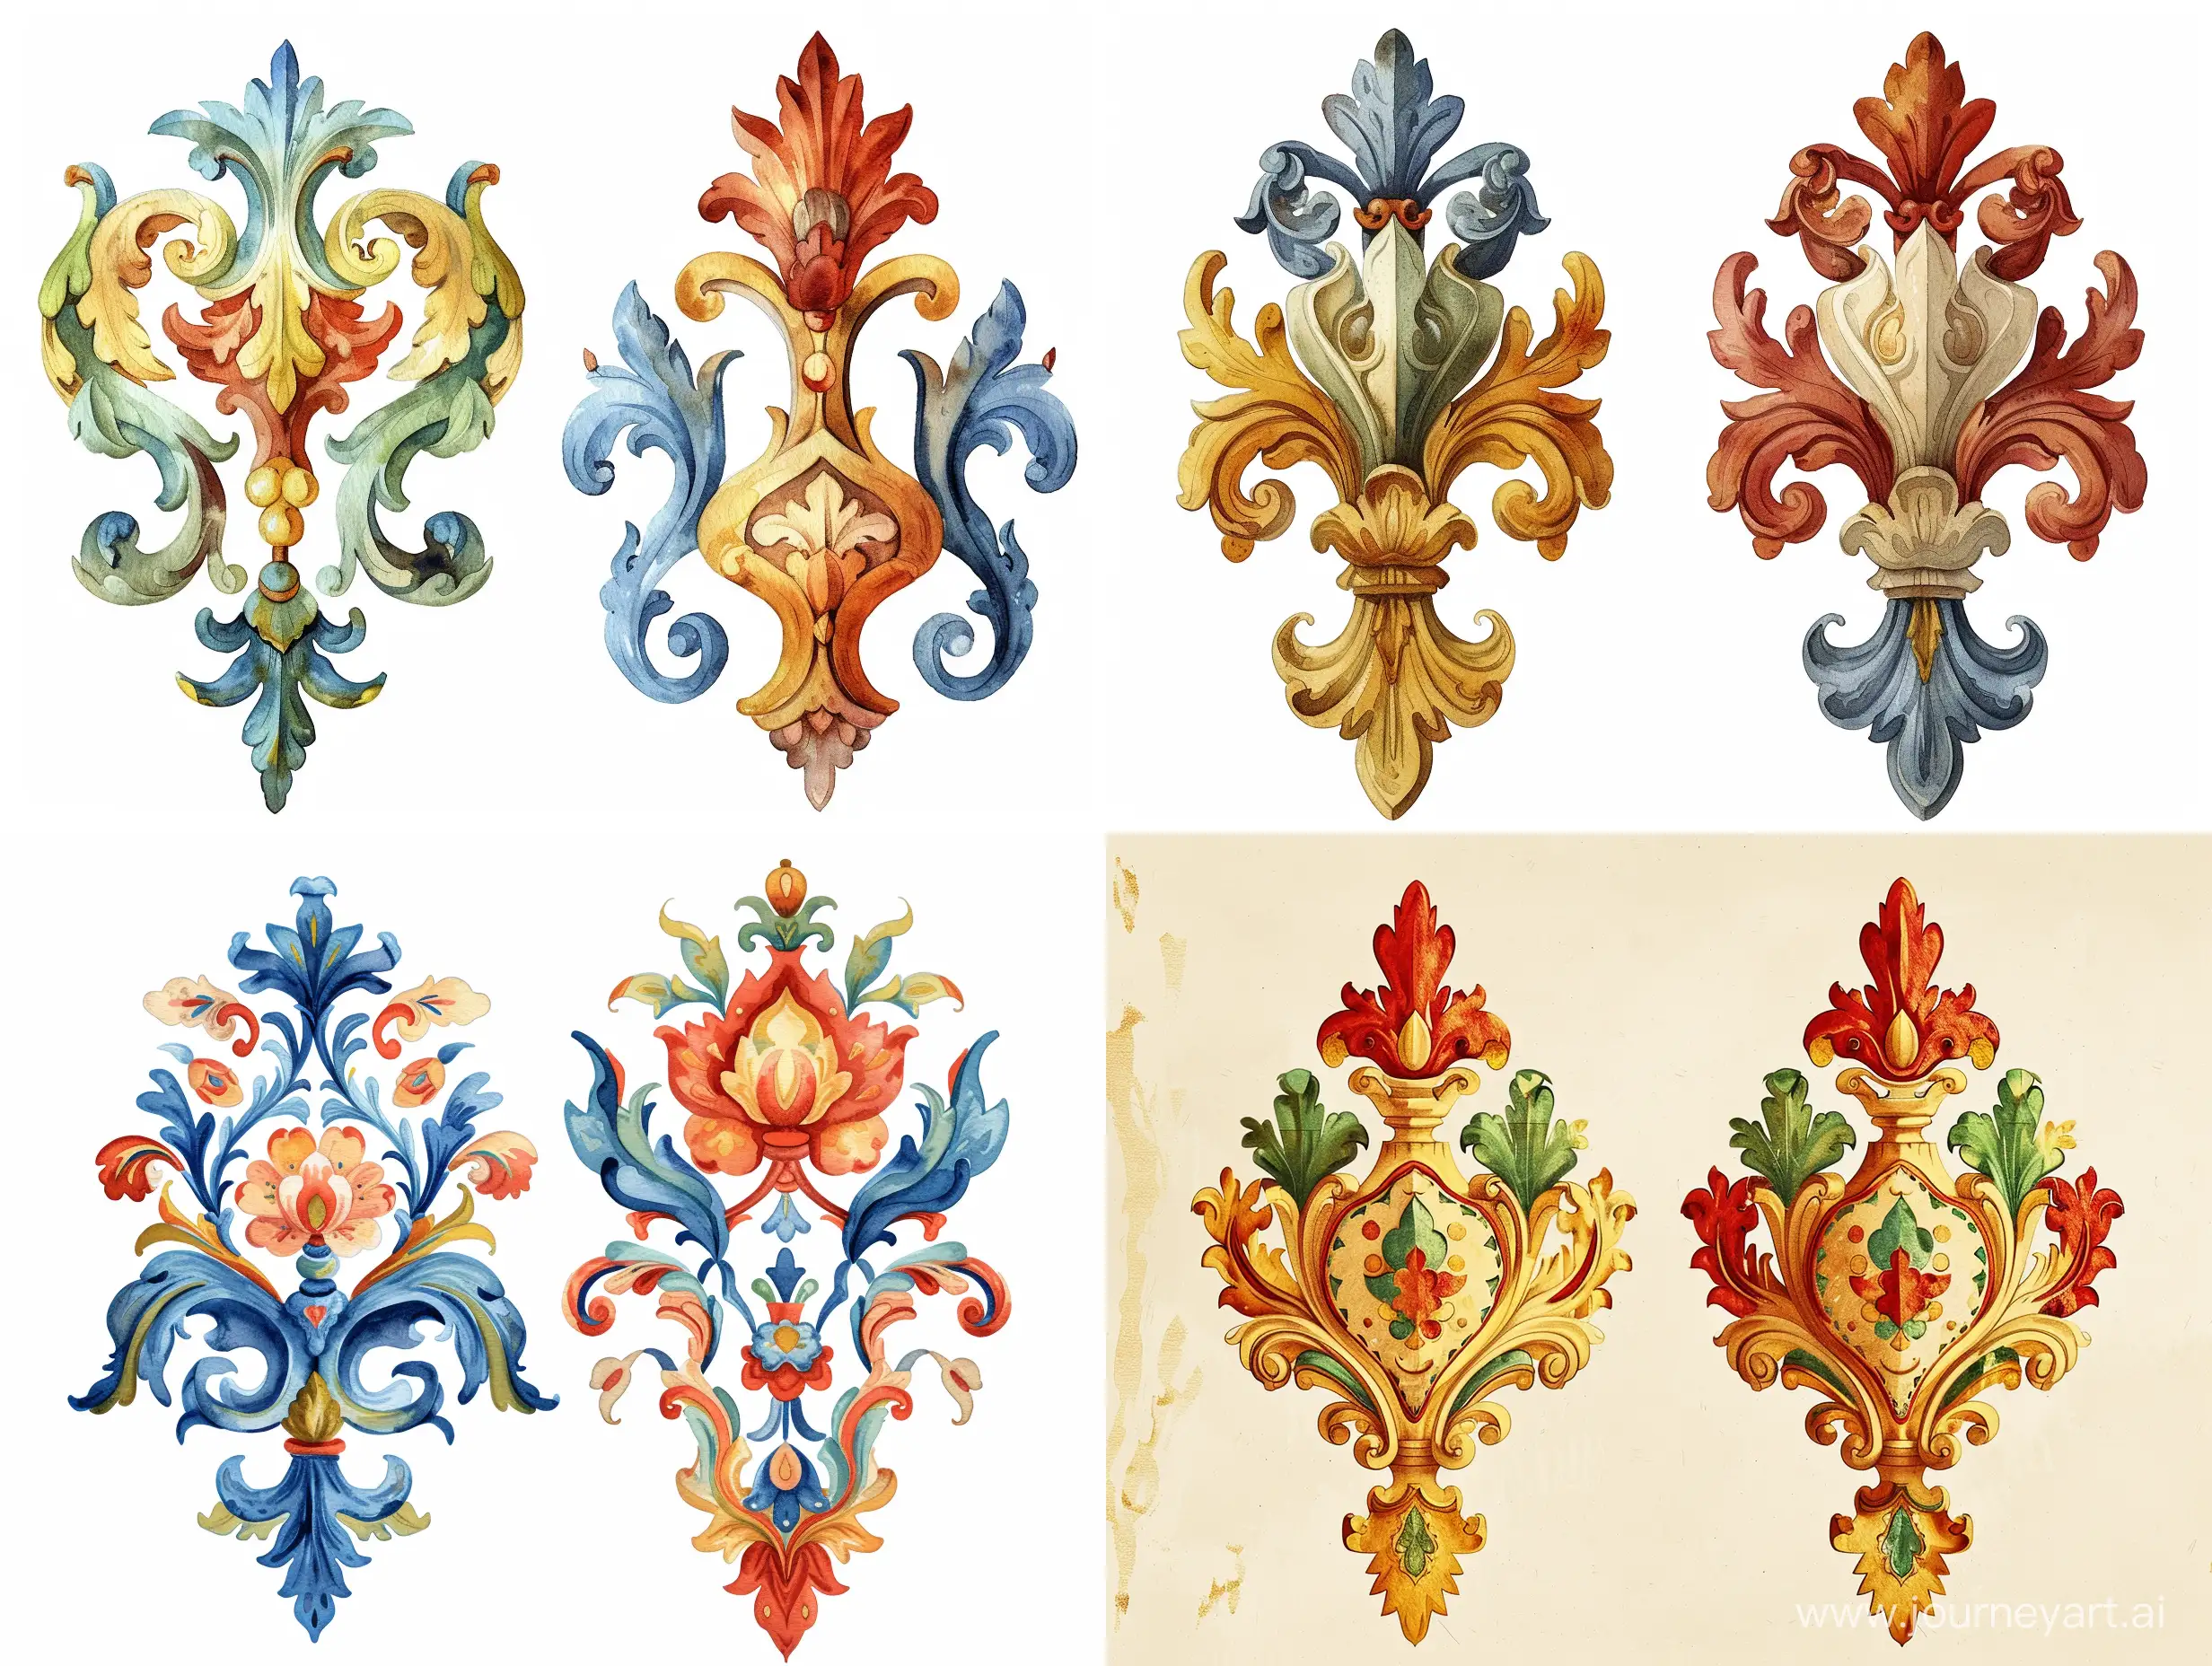 Renaissance-King-Ornaments-Decorative-Variants-in-Watercolor-and-Flat-Illustration